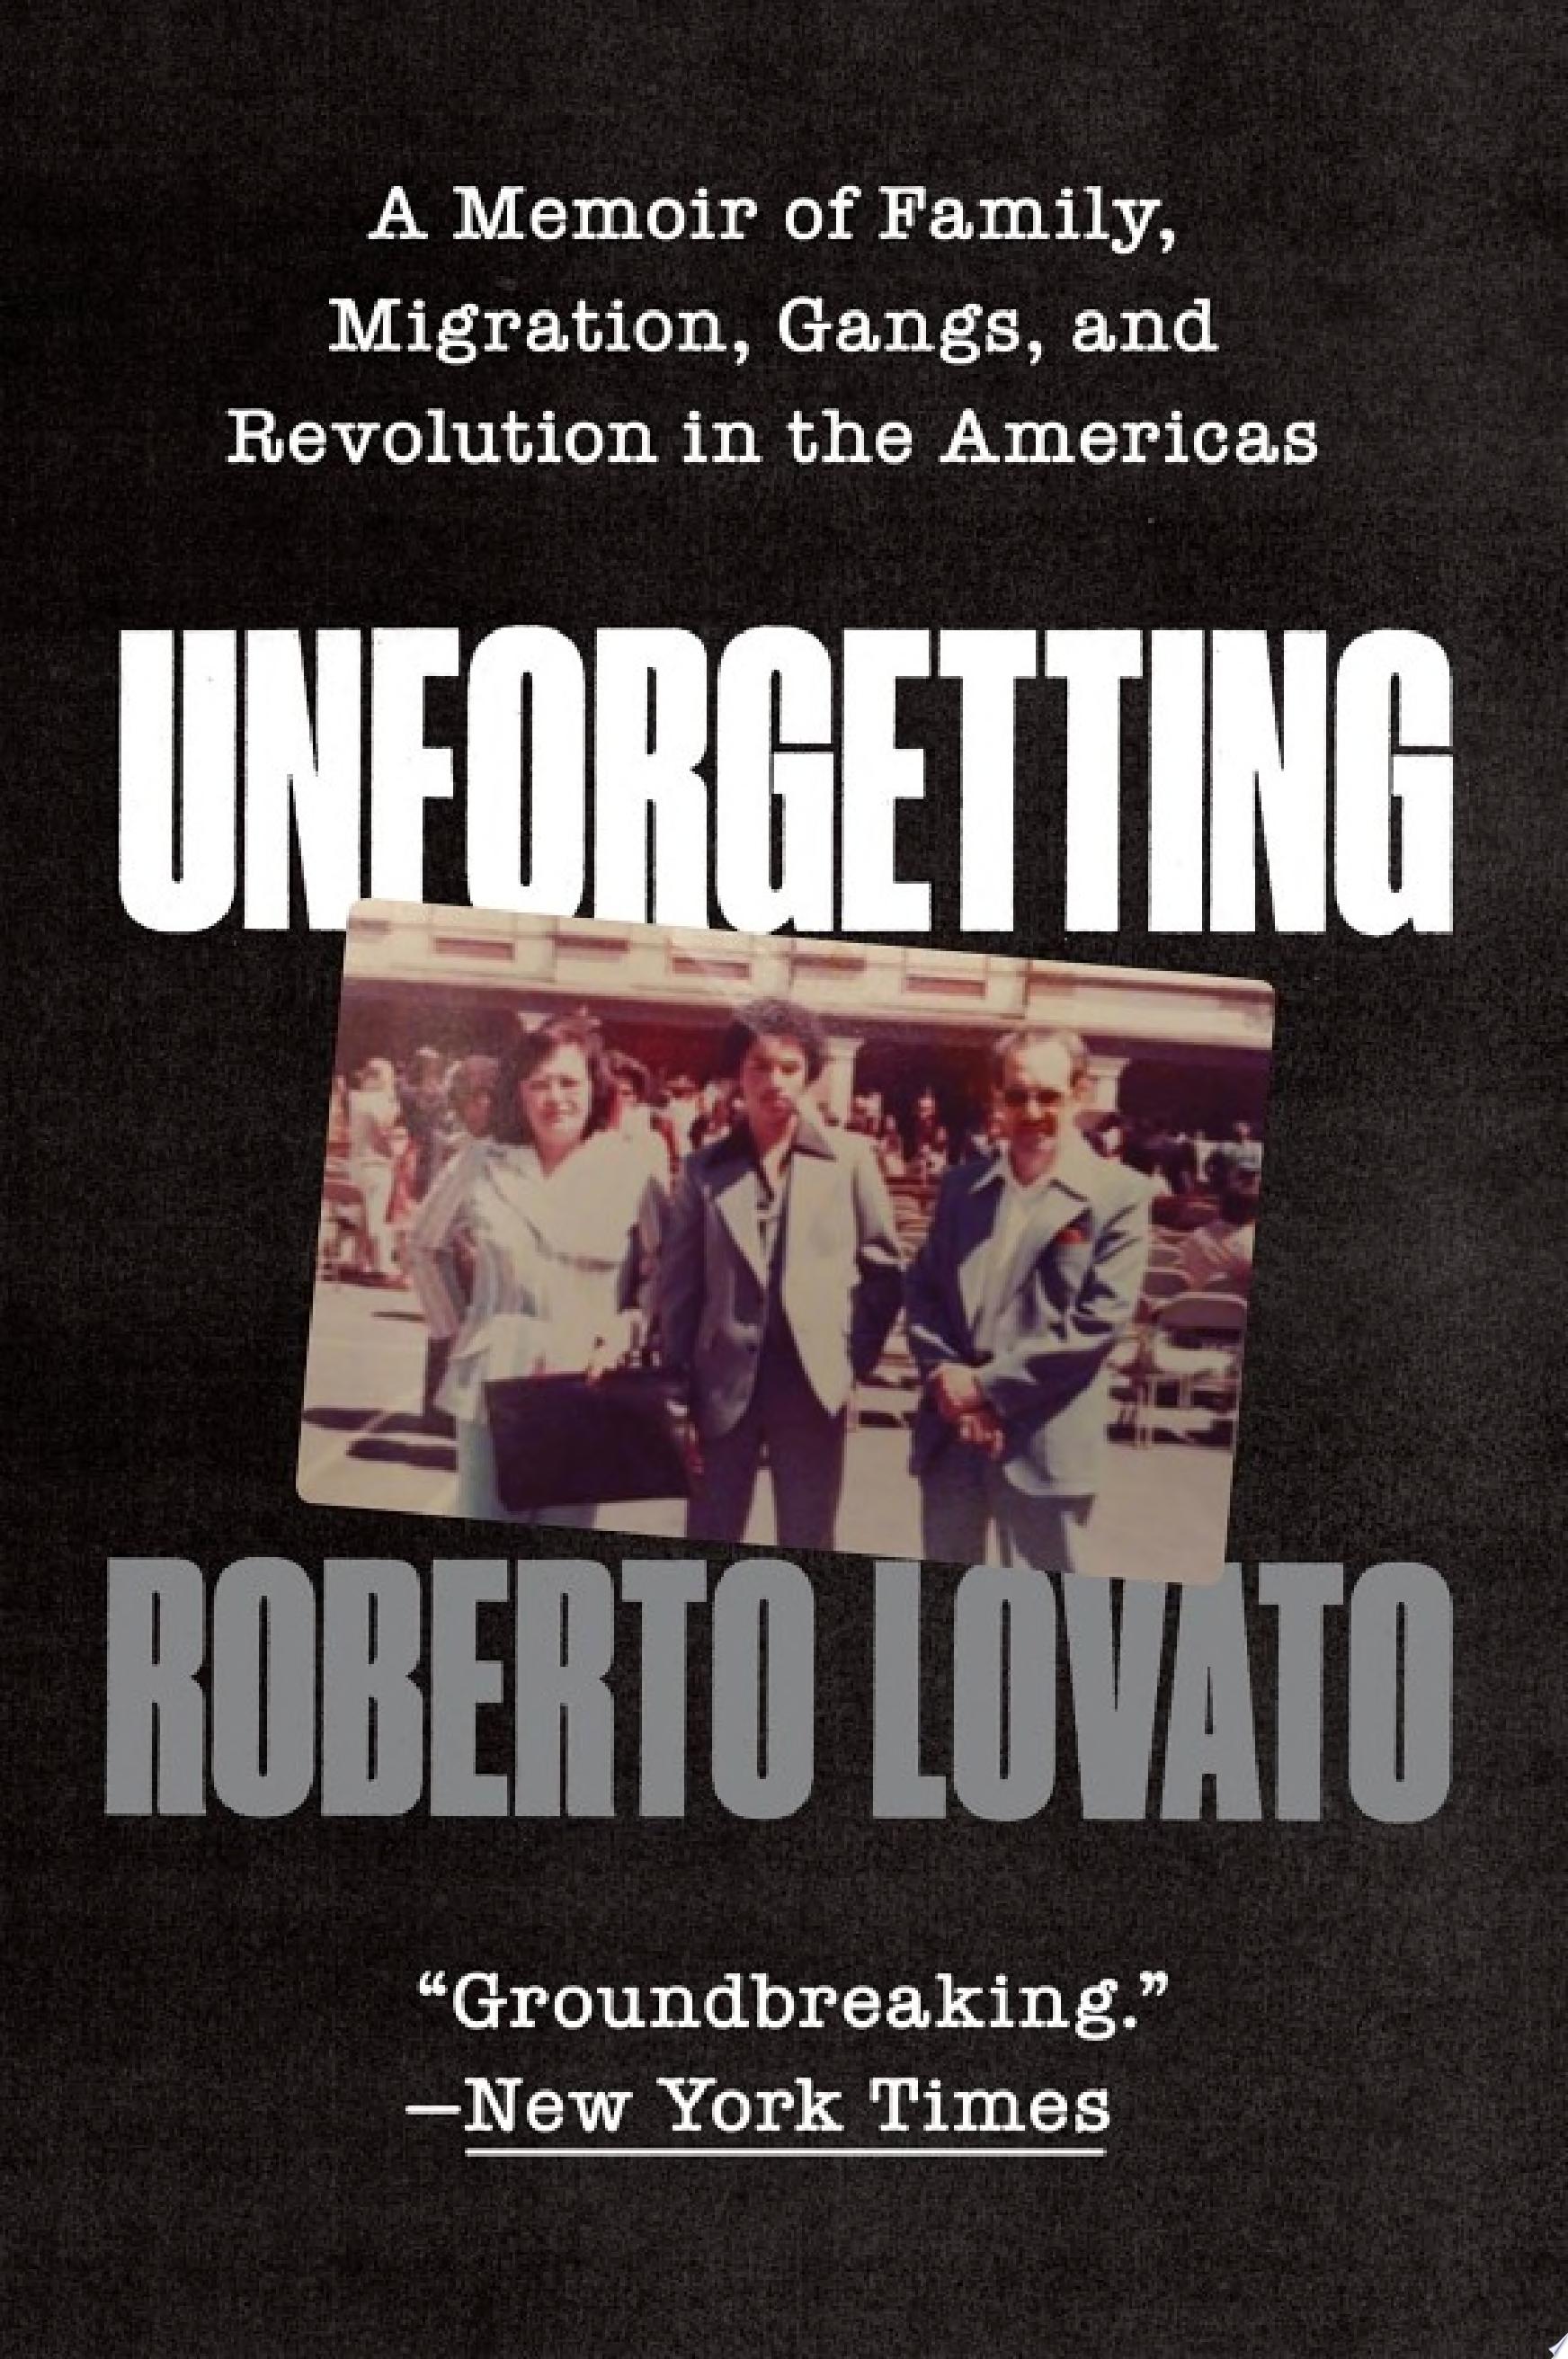 Image for "Unforgetting"